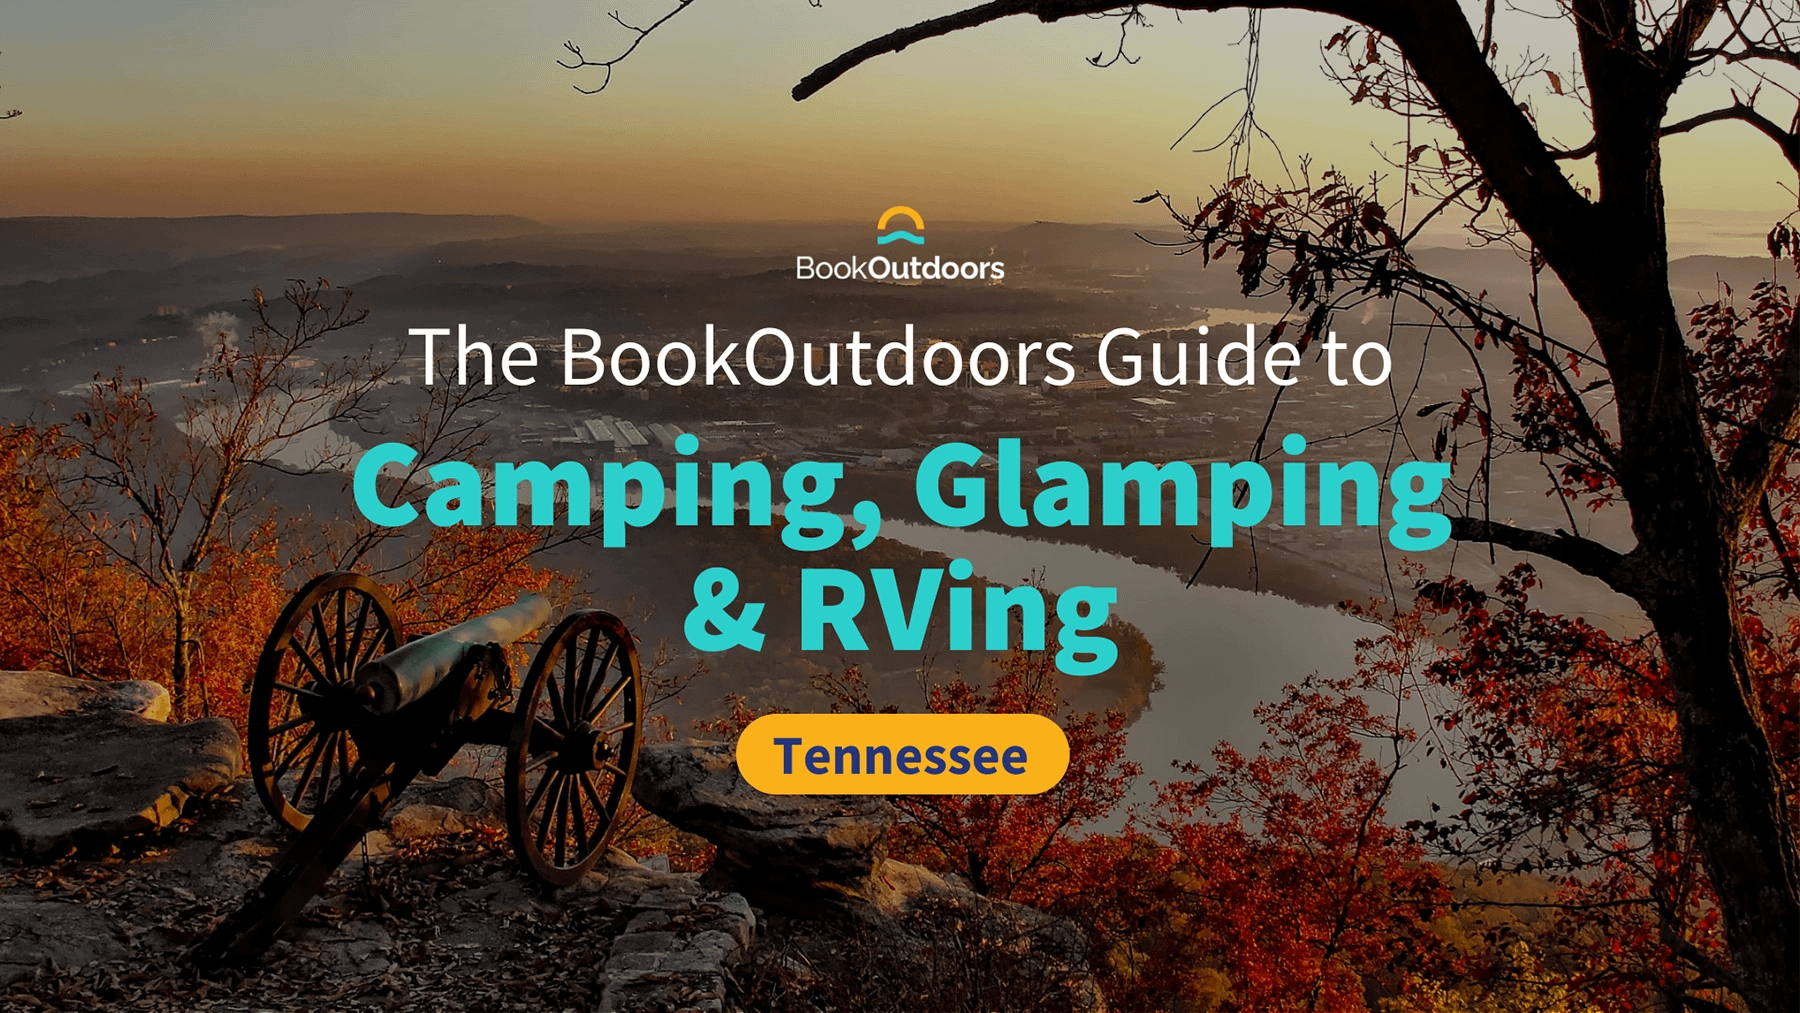 Find the best campgrounds and rv parks in Tennessee